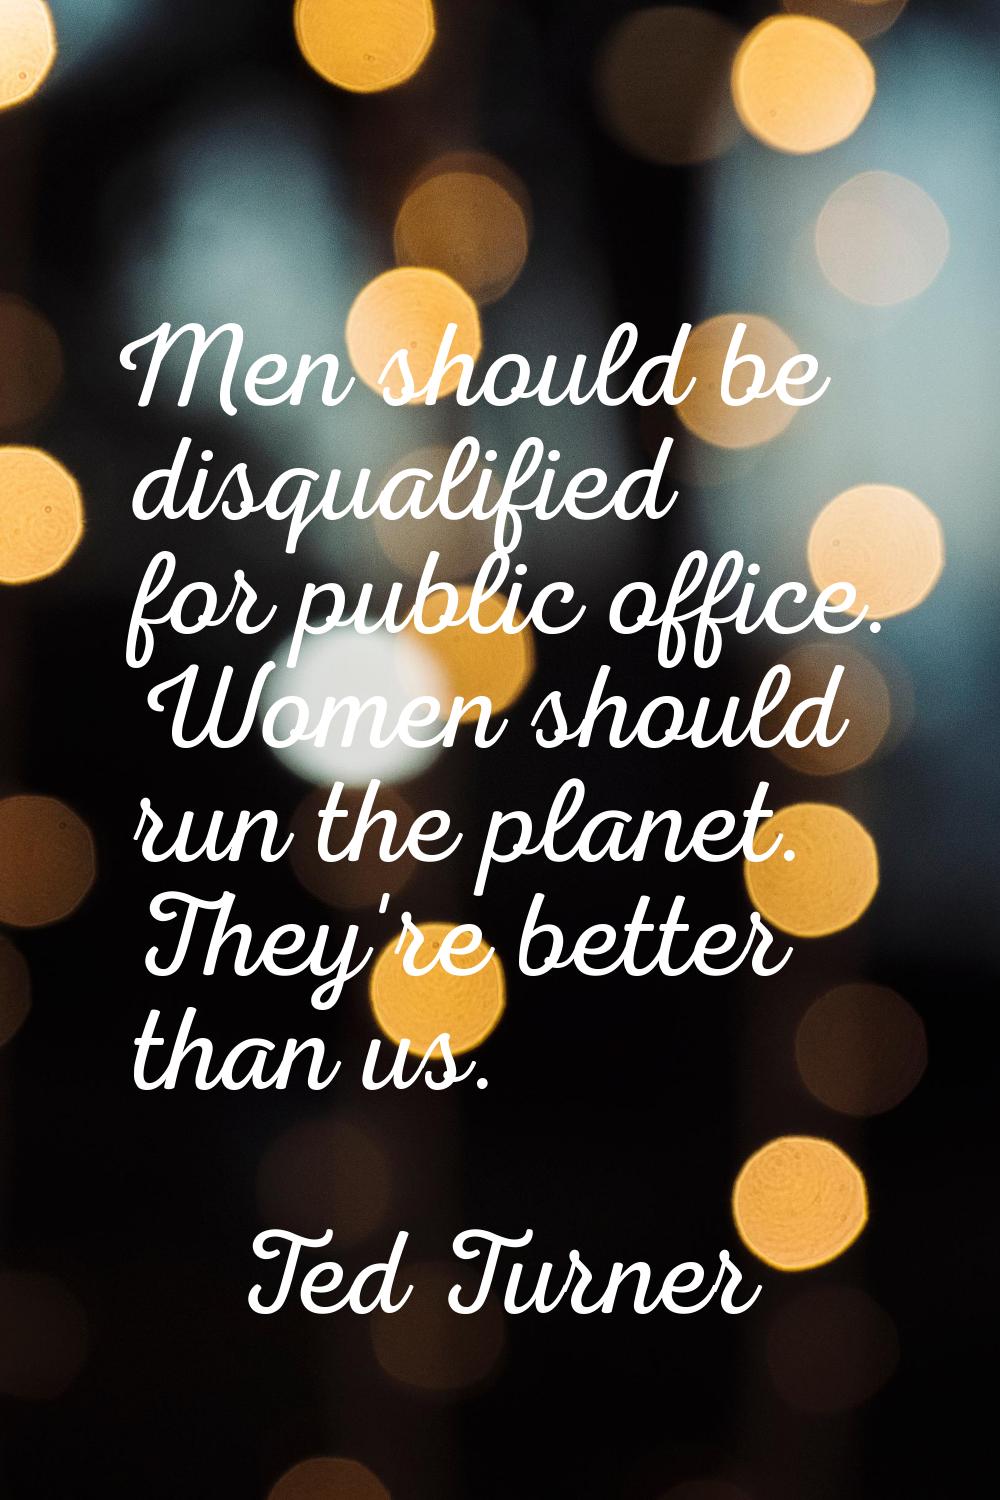 Men should be disqualified for public office. Women should run the planet. They're better than us.